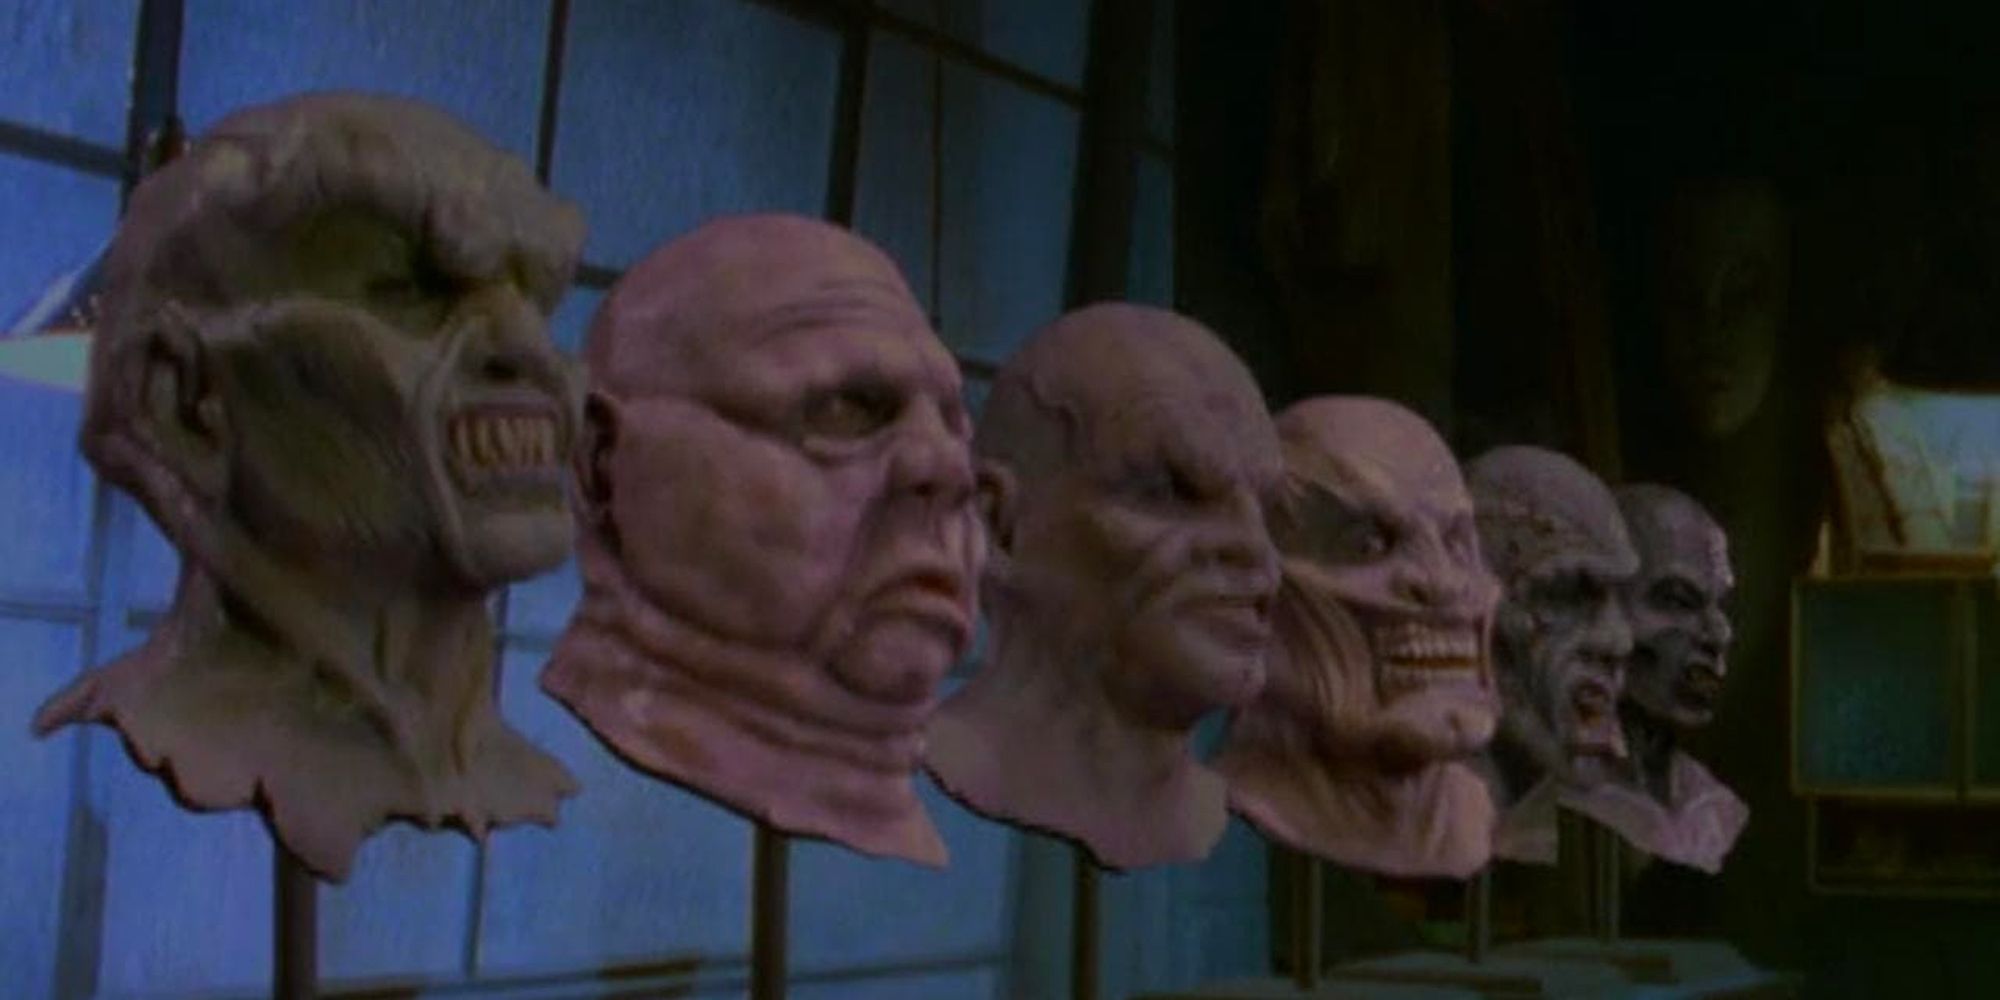 Masks hanging from The Haunted Mask episode of Goosebumps